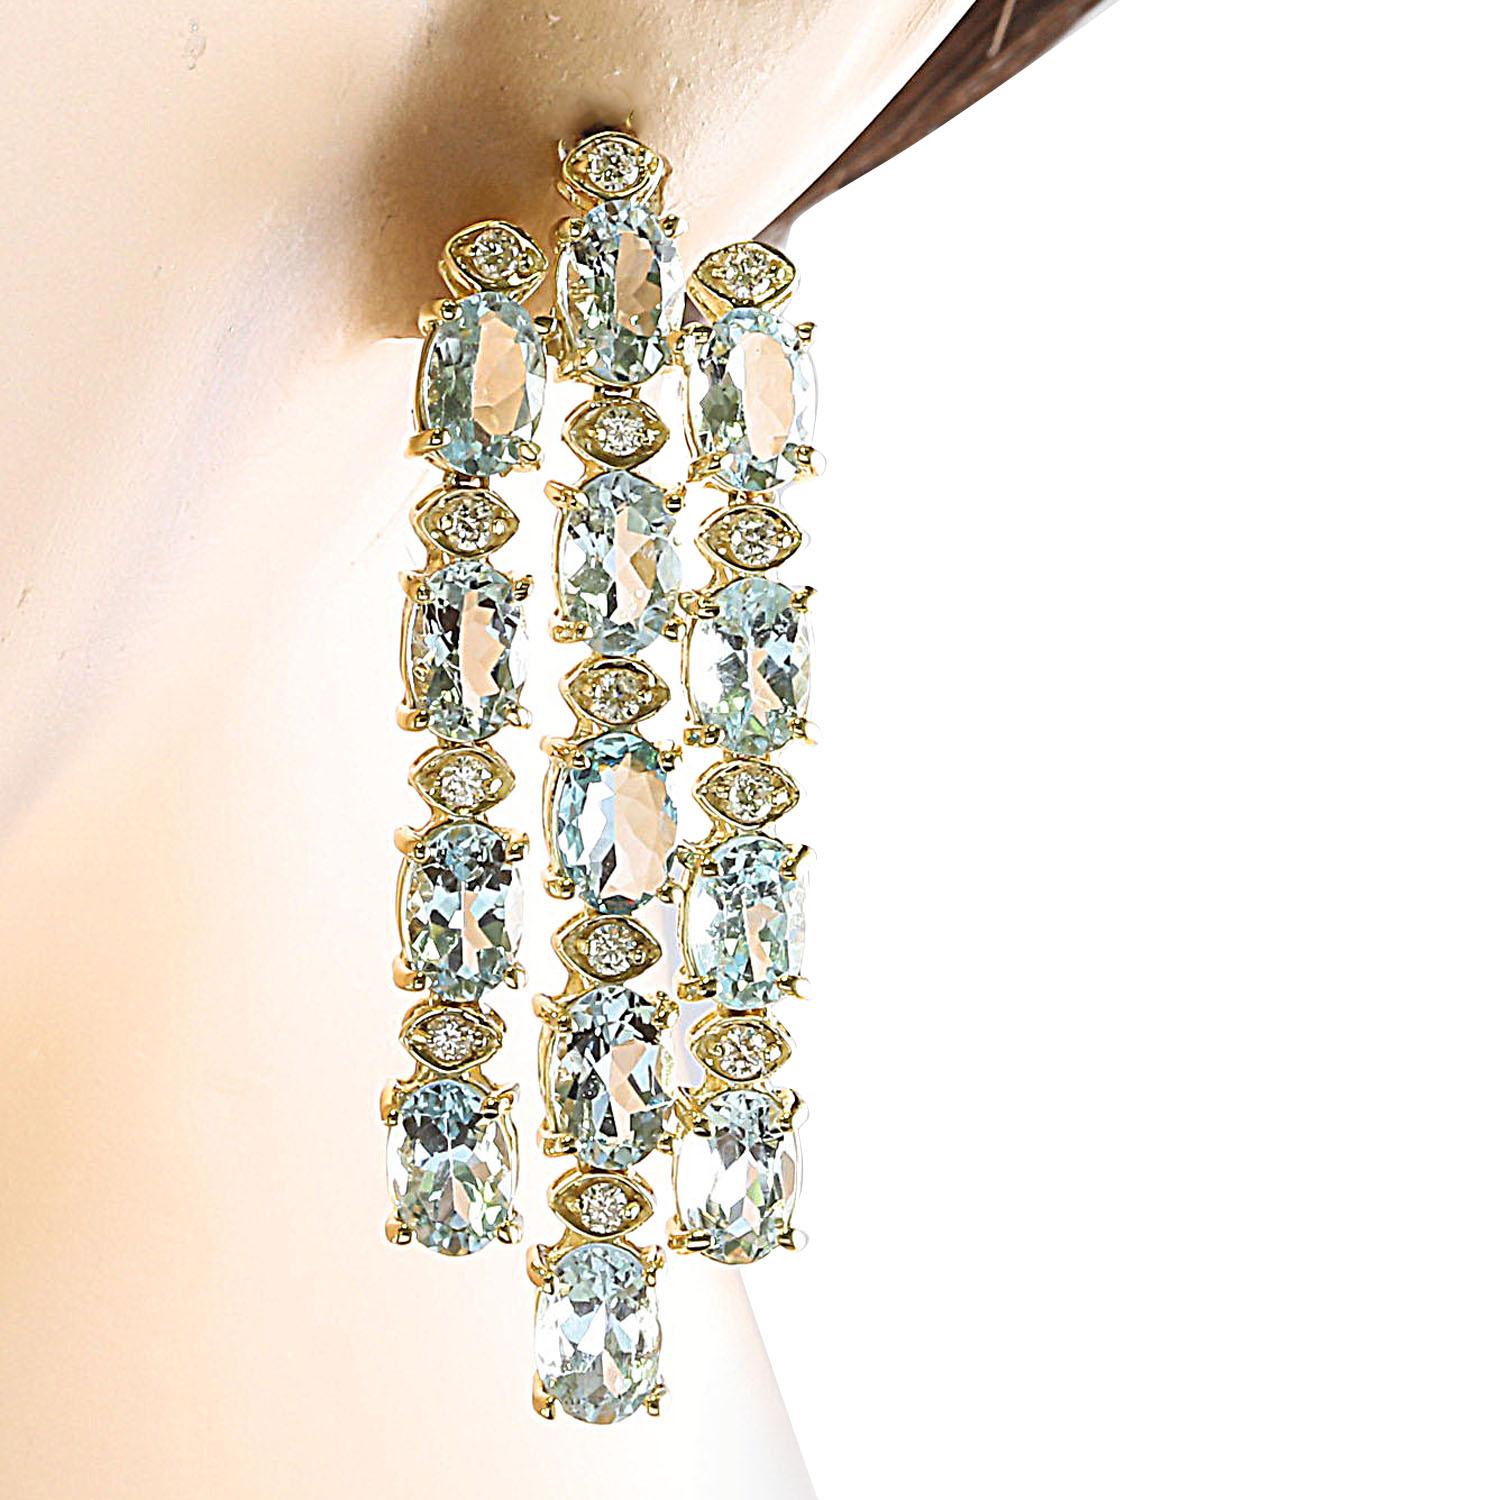 Natural Aquamarine Diamond Earrings in 14 Karat Solid Yellow Gold  In New Condition For Sale In Los Angeles, CA